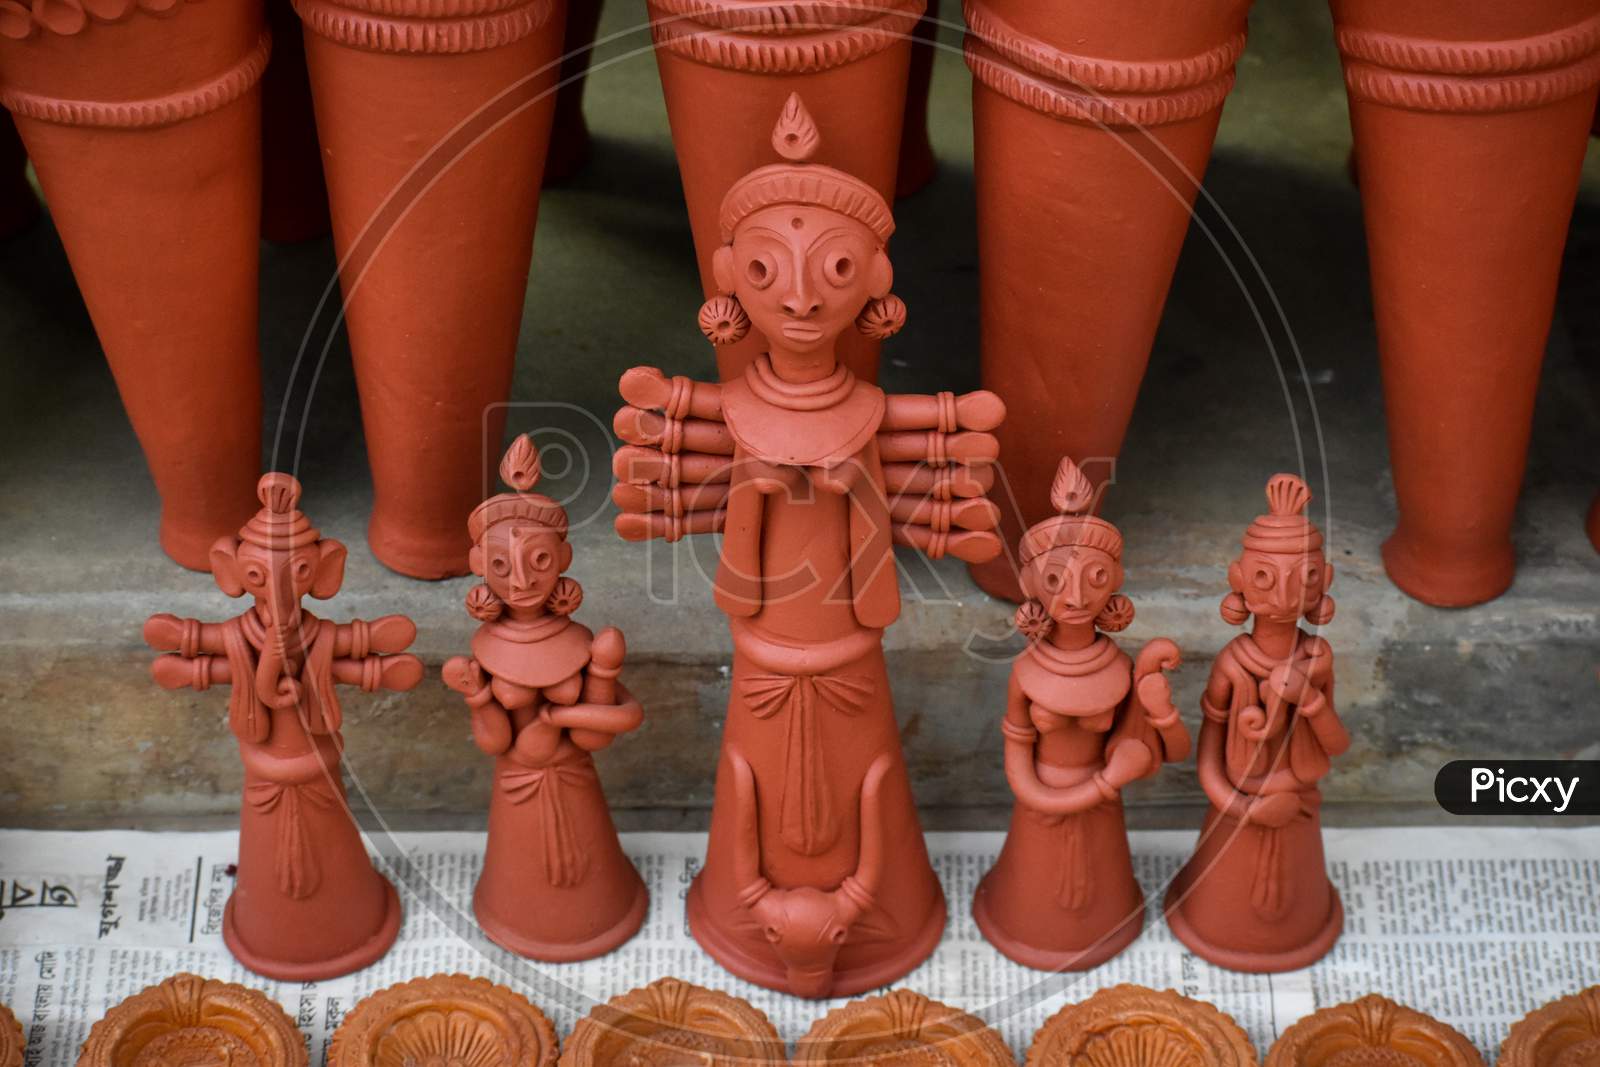 Terracotta Or Clay Craft Has Been The Symbol Of Man'S First Attempt At Craftsmanship, Artist Produced Terracotta Horses And Elephants Near Panchmura, Rajagram, Sonamukhi, Sculpture Of Bishnupur And Bankura